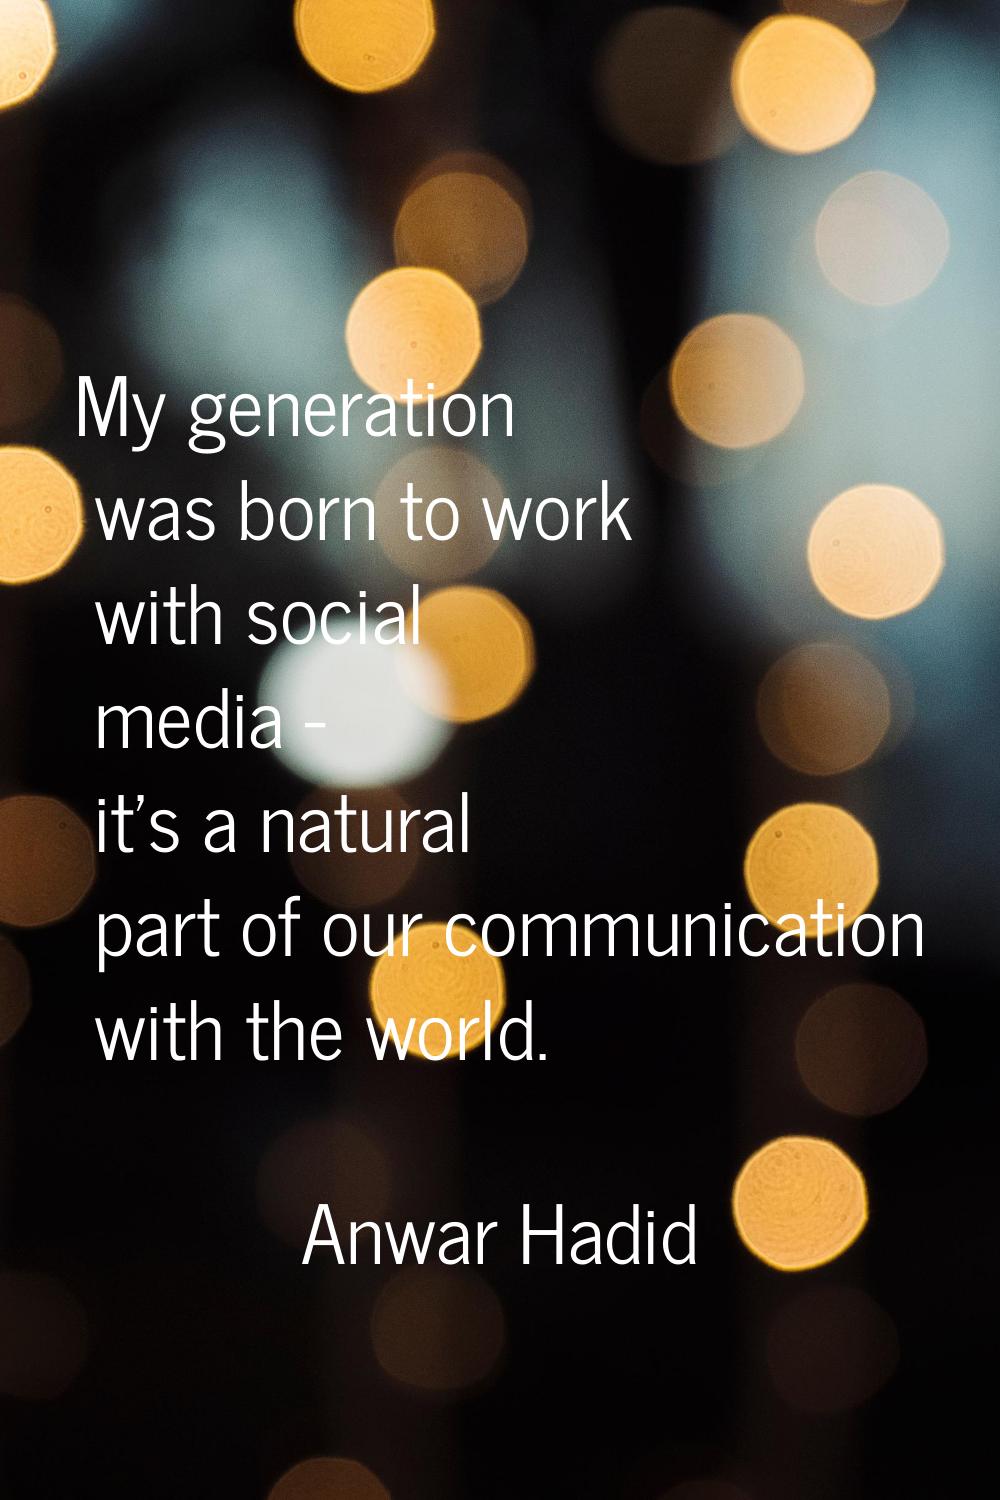 My generation was born to work with social media - it's a natural part of our communication with th